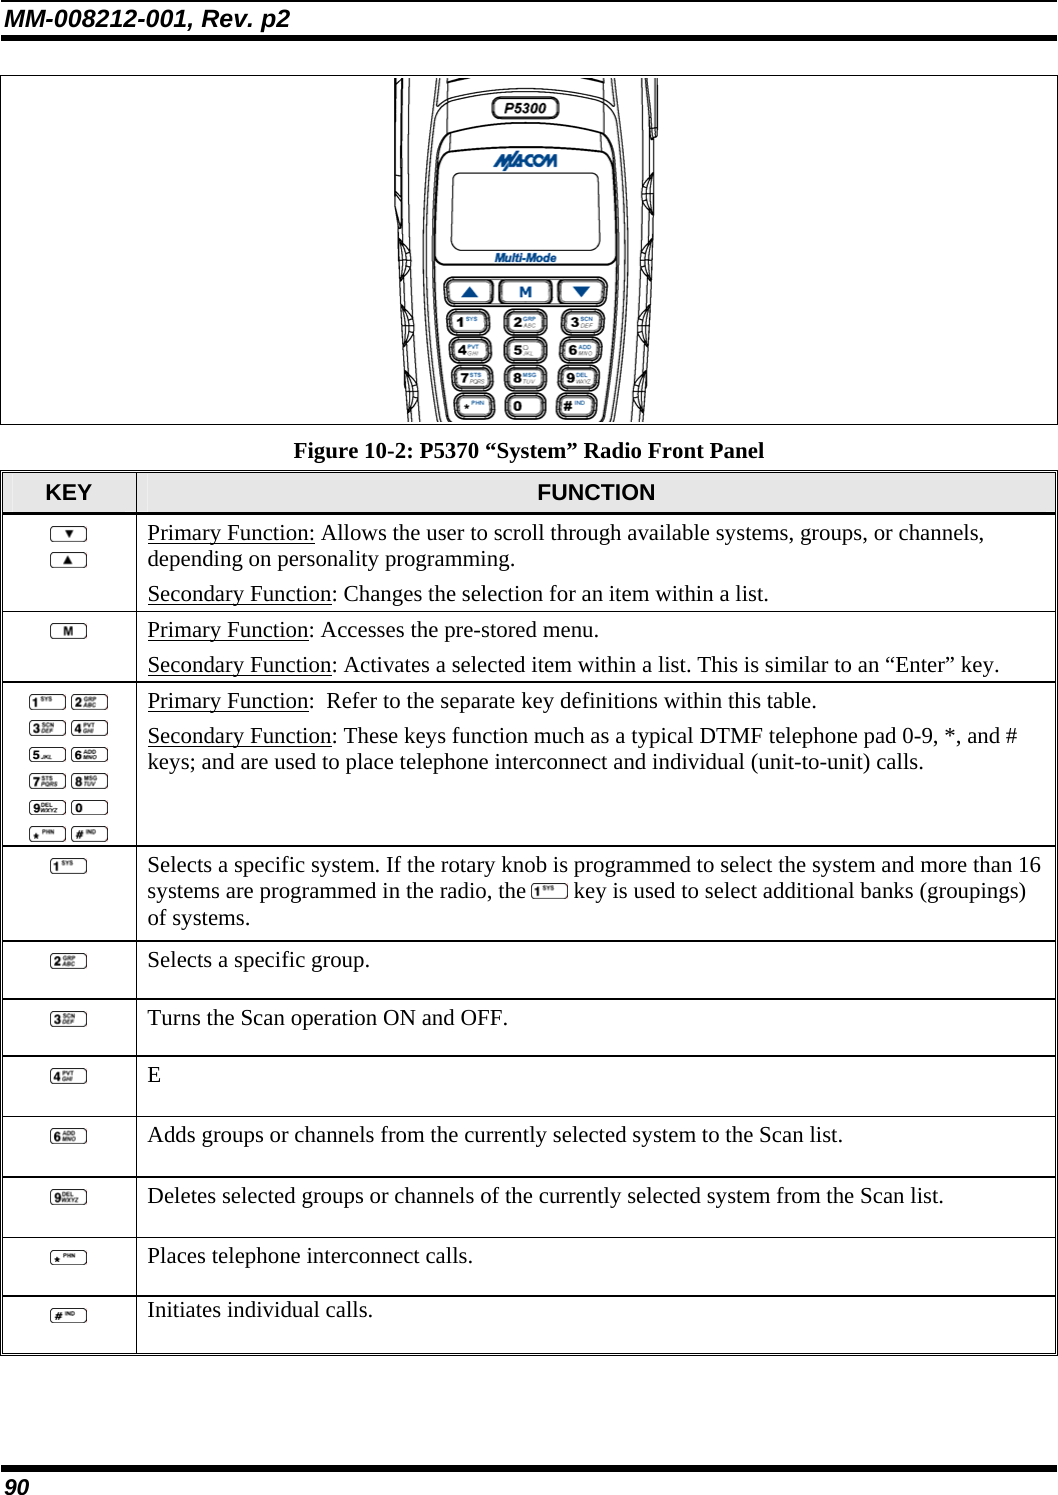 MM-008212-001, Rev. p2 90  Figure 10-2: P5370 “System” Radio Front Panel KEY  FUNCTION   Primary Function: Allows the user to scroll through available systems, groups, or channels, depending on personality programming.  Secondary Function: Changes the selection for an item within a list.  Primary Function: Accesses the pre-stored menu.  Secondary Function: Activates a selected item within a list. This is similar to an “Enter” key.                   Primary Function:  Refer to the separate key definitions within this table. Secondary Function: These keys function much as a typical DTMF telephone pad 0-9, *, and # keys; and are used to place telephone interconnect and individual (unit-to-unit) calls.   Selects a specific system. If the rotary knob is programmed to select the system and more than 16 systems are programmed in the radio, the   key is used to select additional banks (groupings) of systems.  Selects a specific group.  Turns the Scan operation ON and OFF.  E  Adds groups or channels from the currently selected system to the Scan list.  Deletes selected groups or channels of the currently selected system from the Scan list.  Places telephone interconnect calls.  Initiates individual calls. 